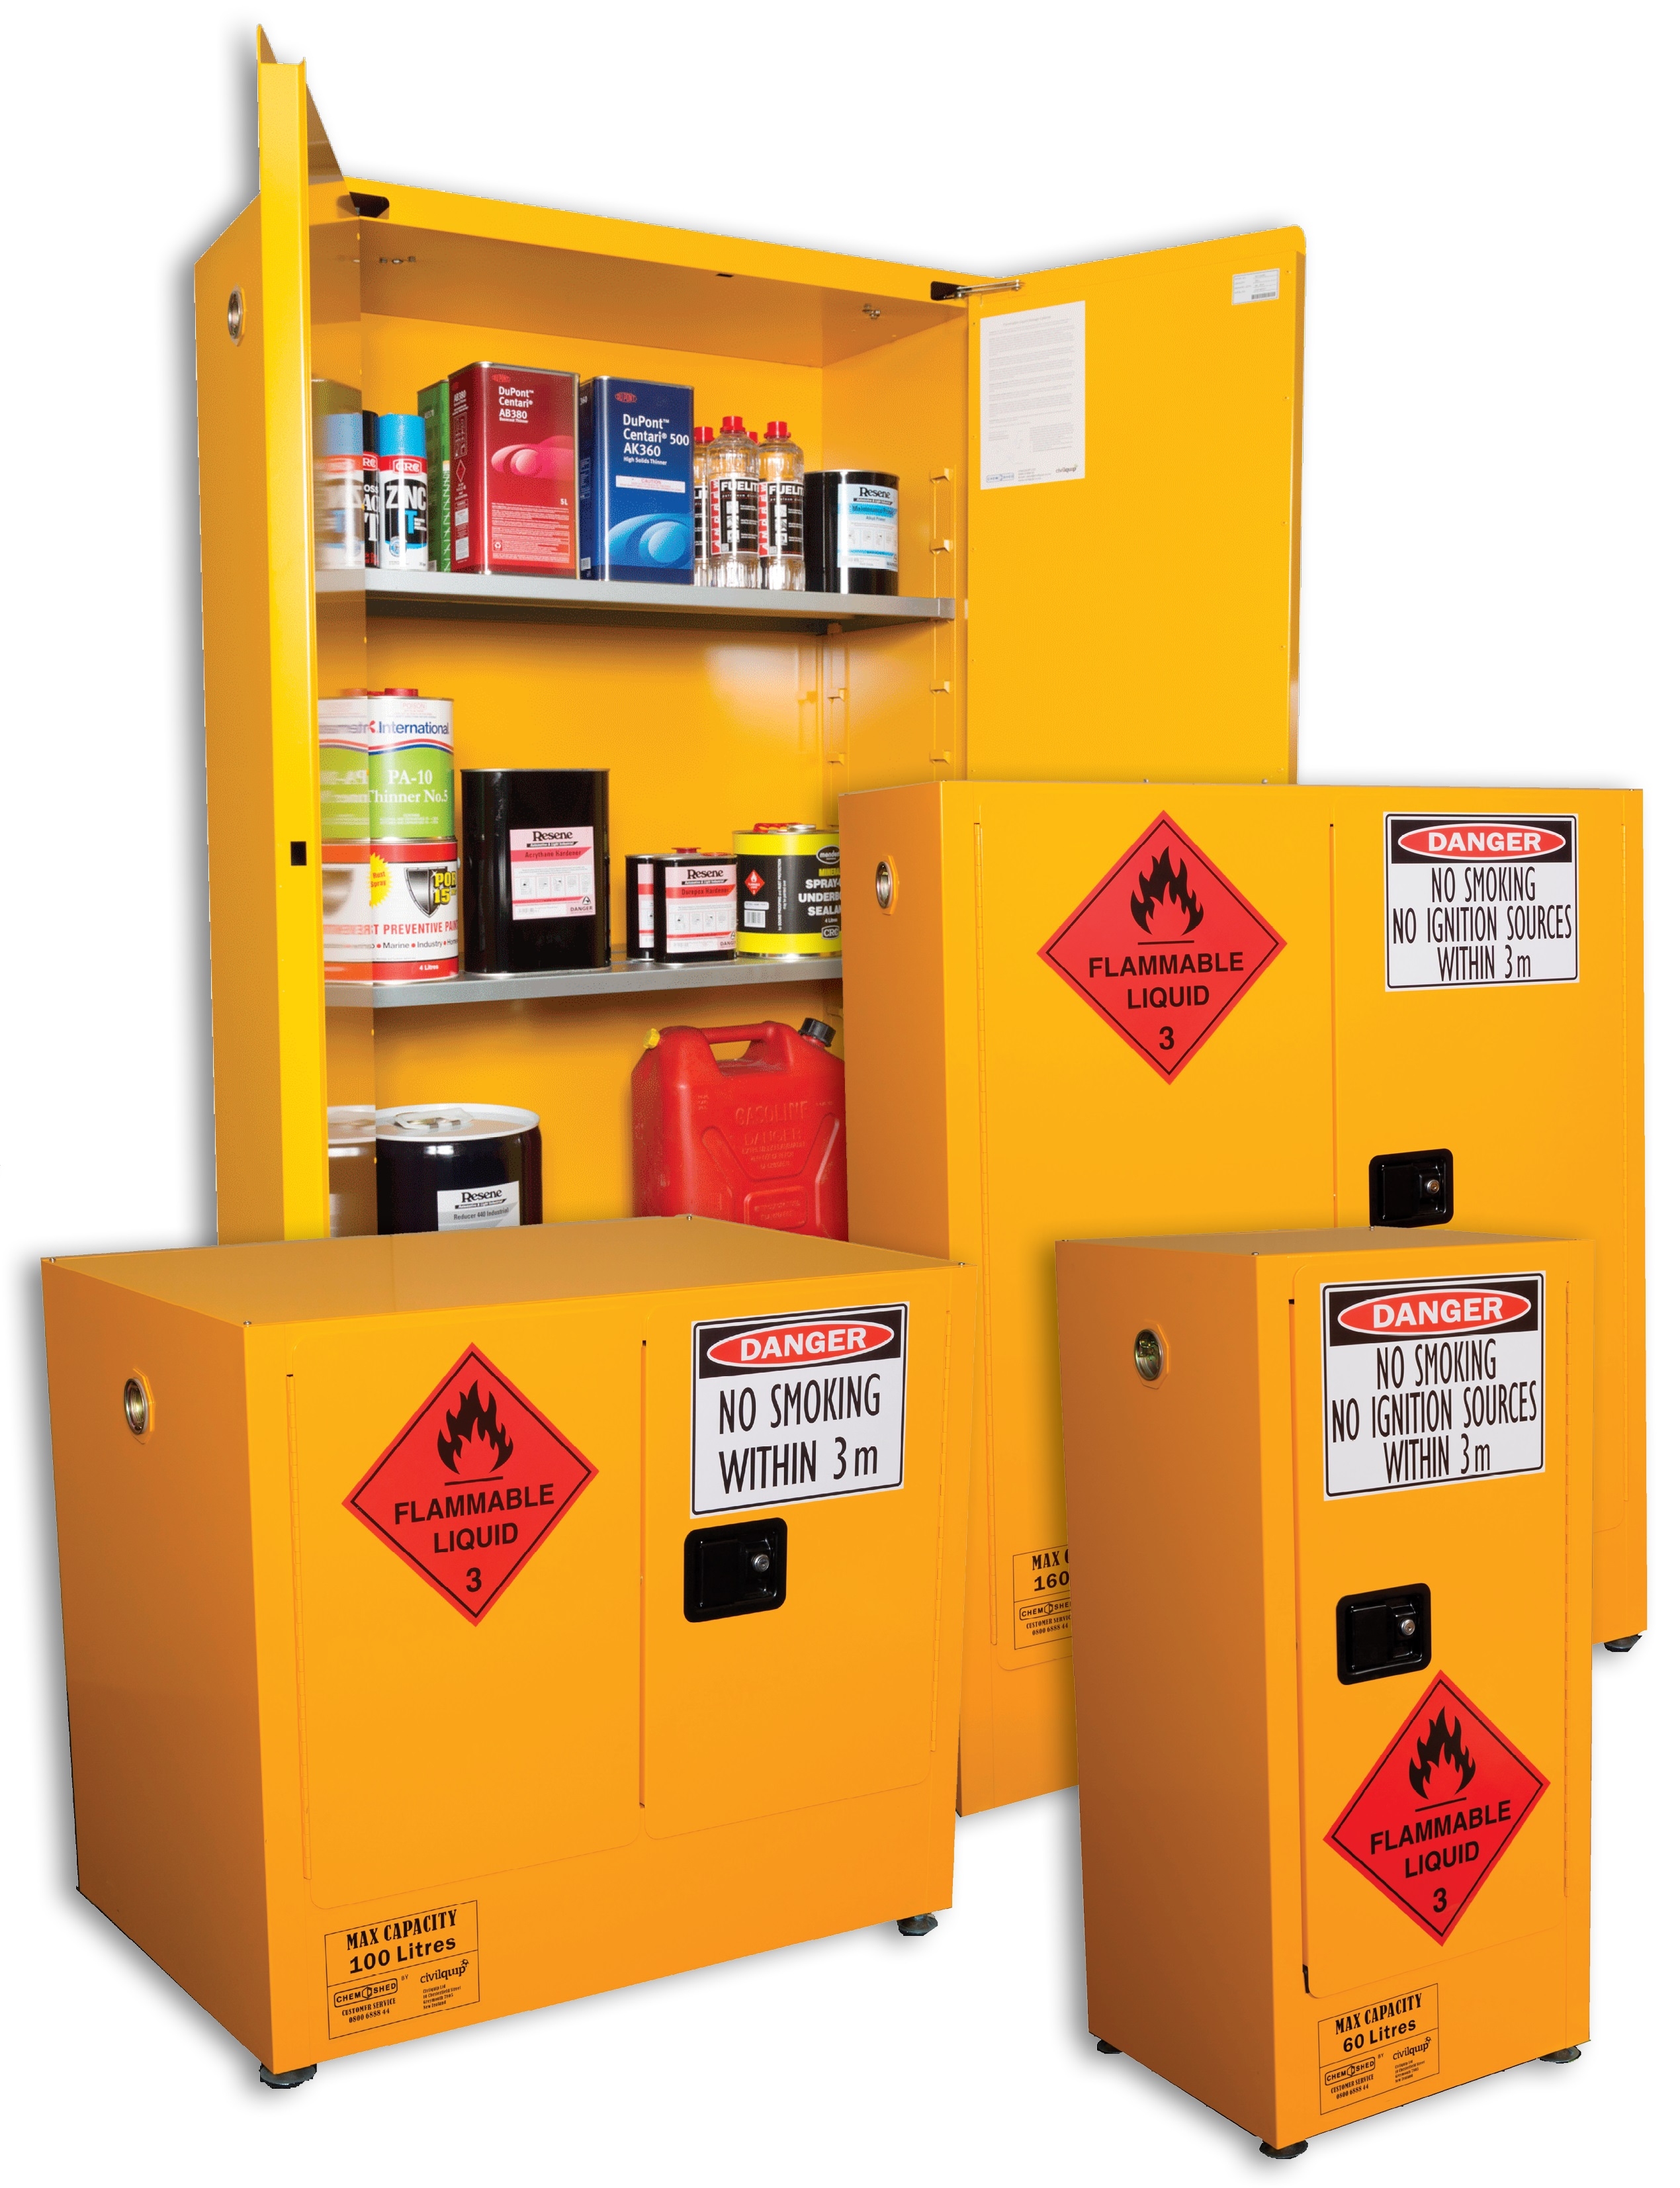 Lovely Photos Of Flammable Chemical Storage Cabinet 12346 - Storage ...